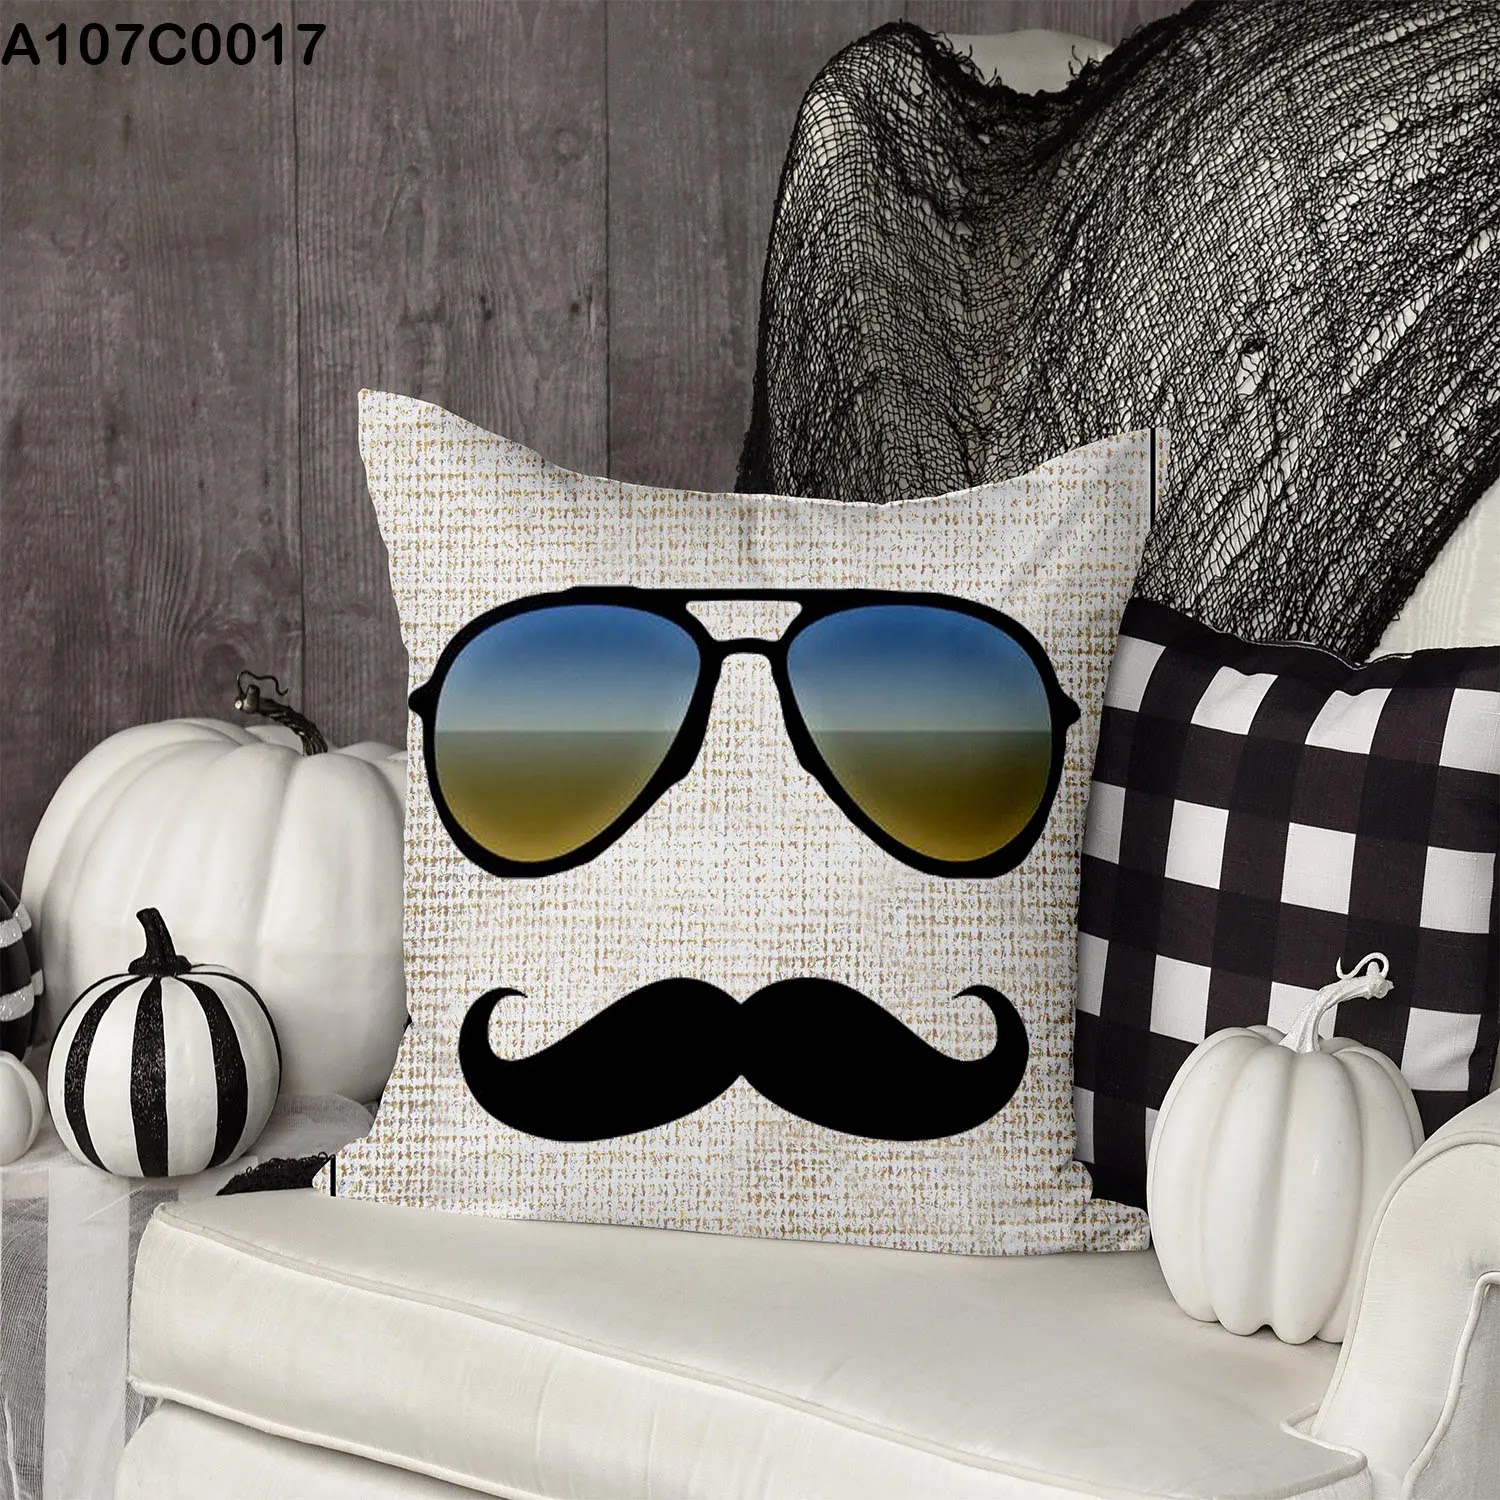 Pillow case with glasses and mustache drawing